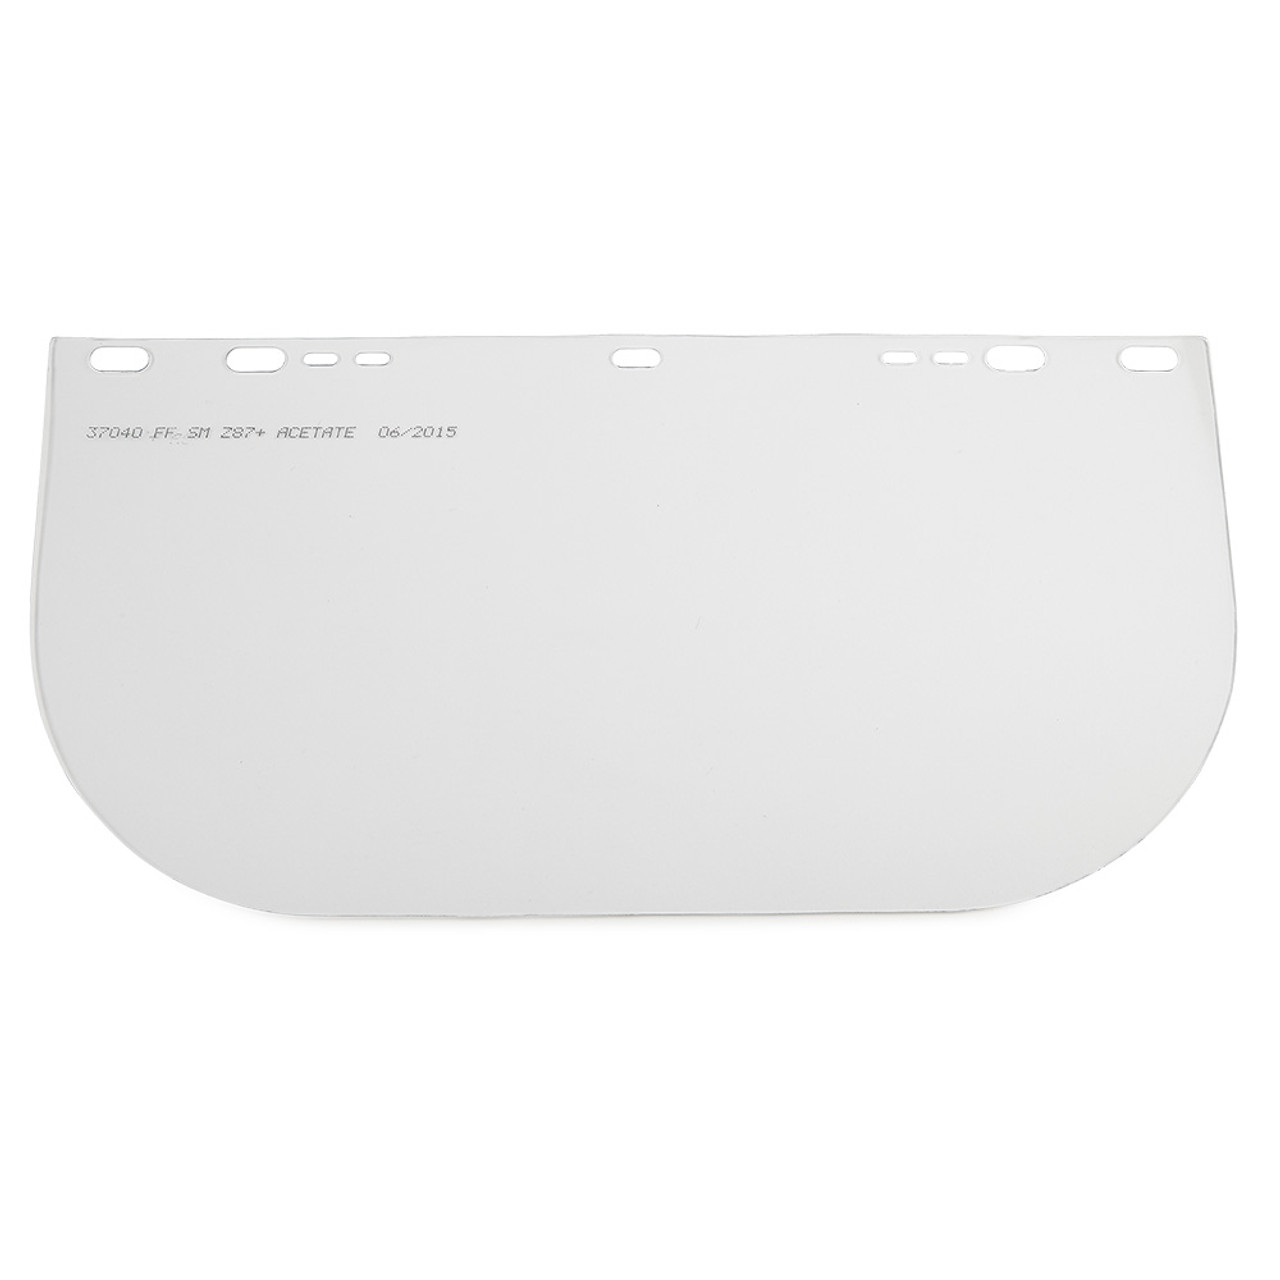 Replacement 301 Series 8 x 15½" Clear Sta-Clear® AF  - Acetate Face Shield  S37040